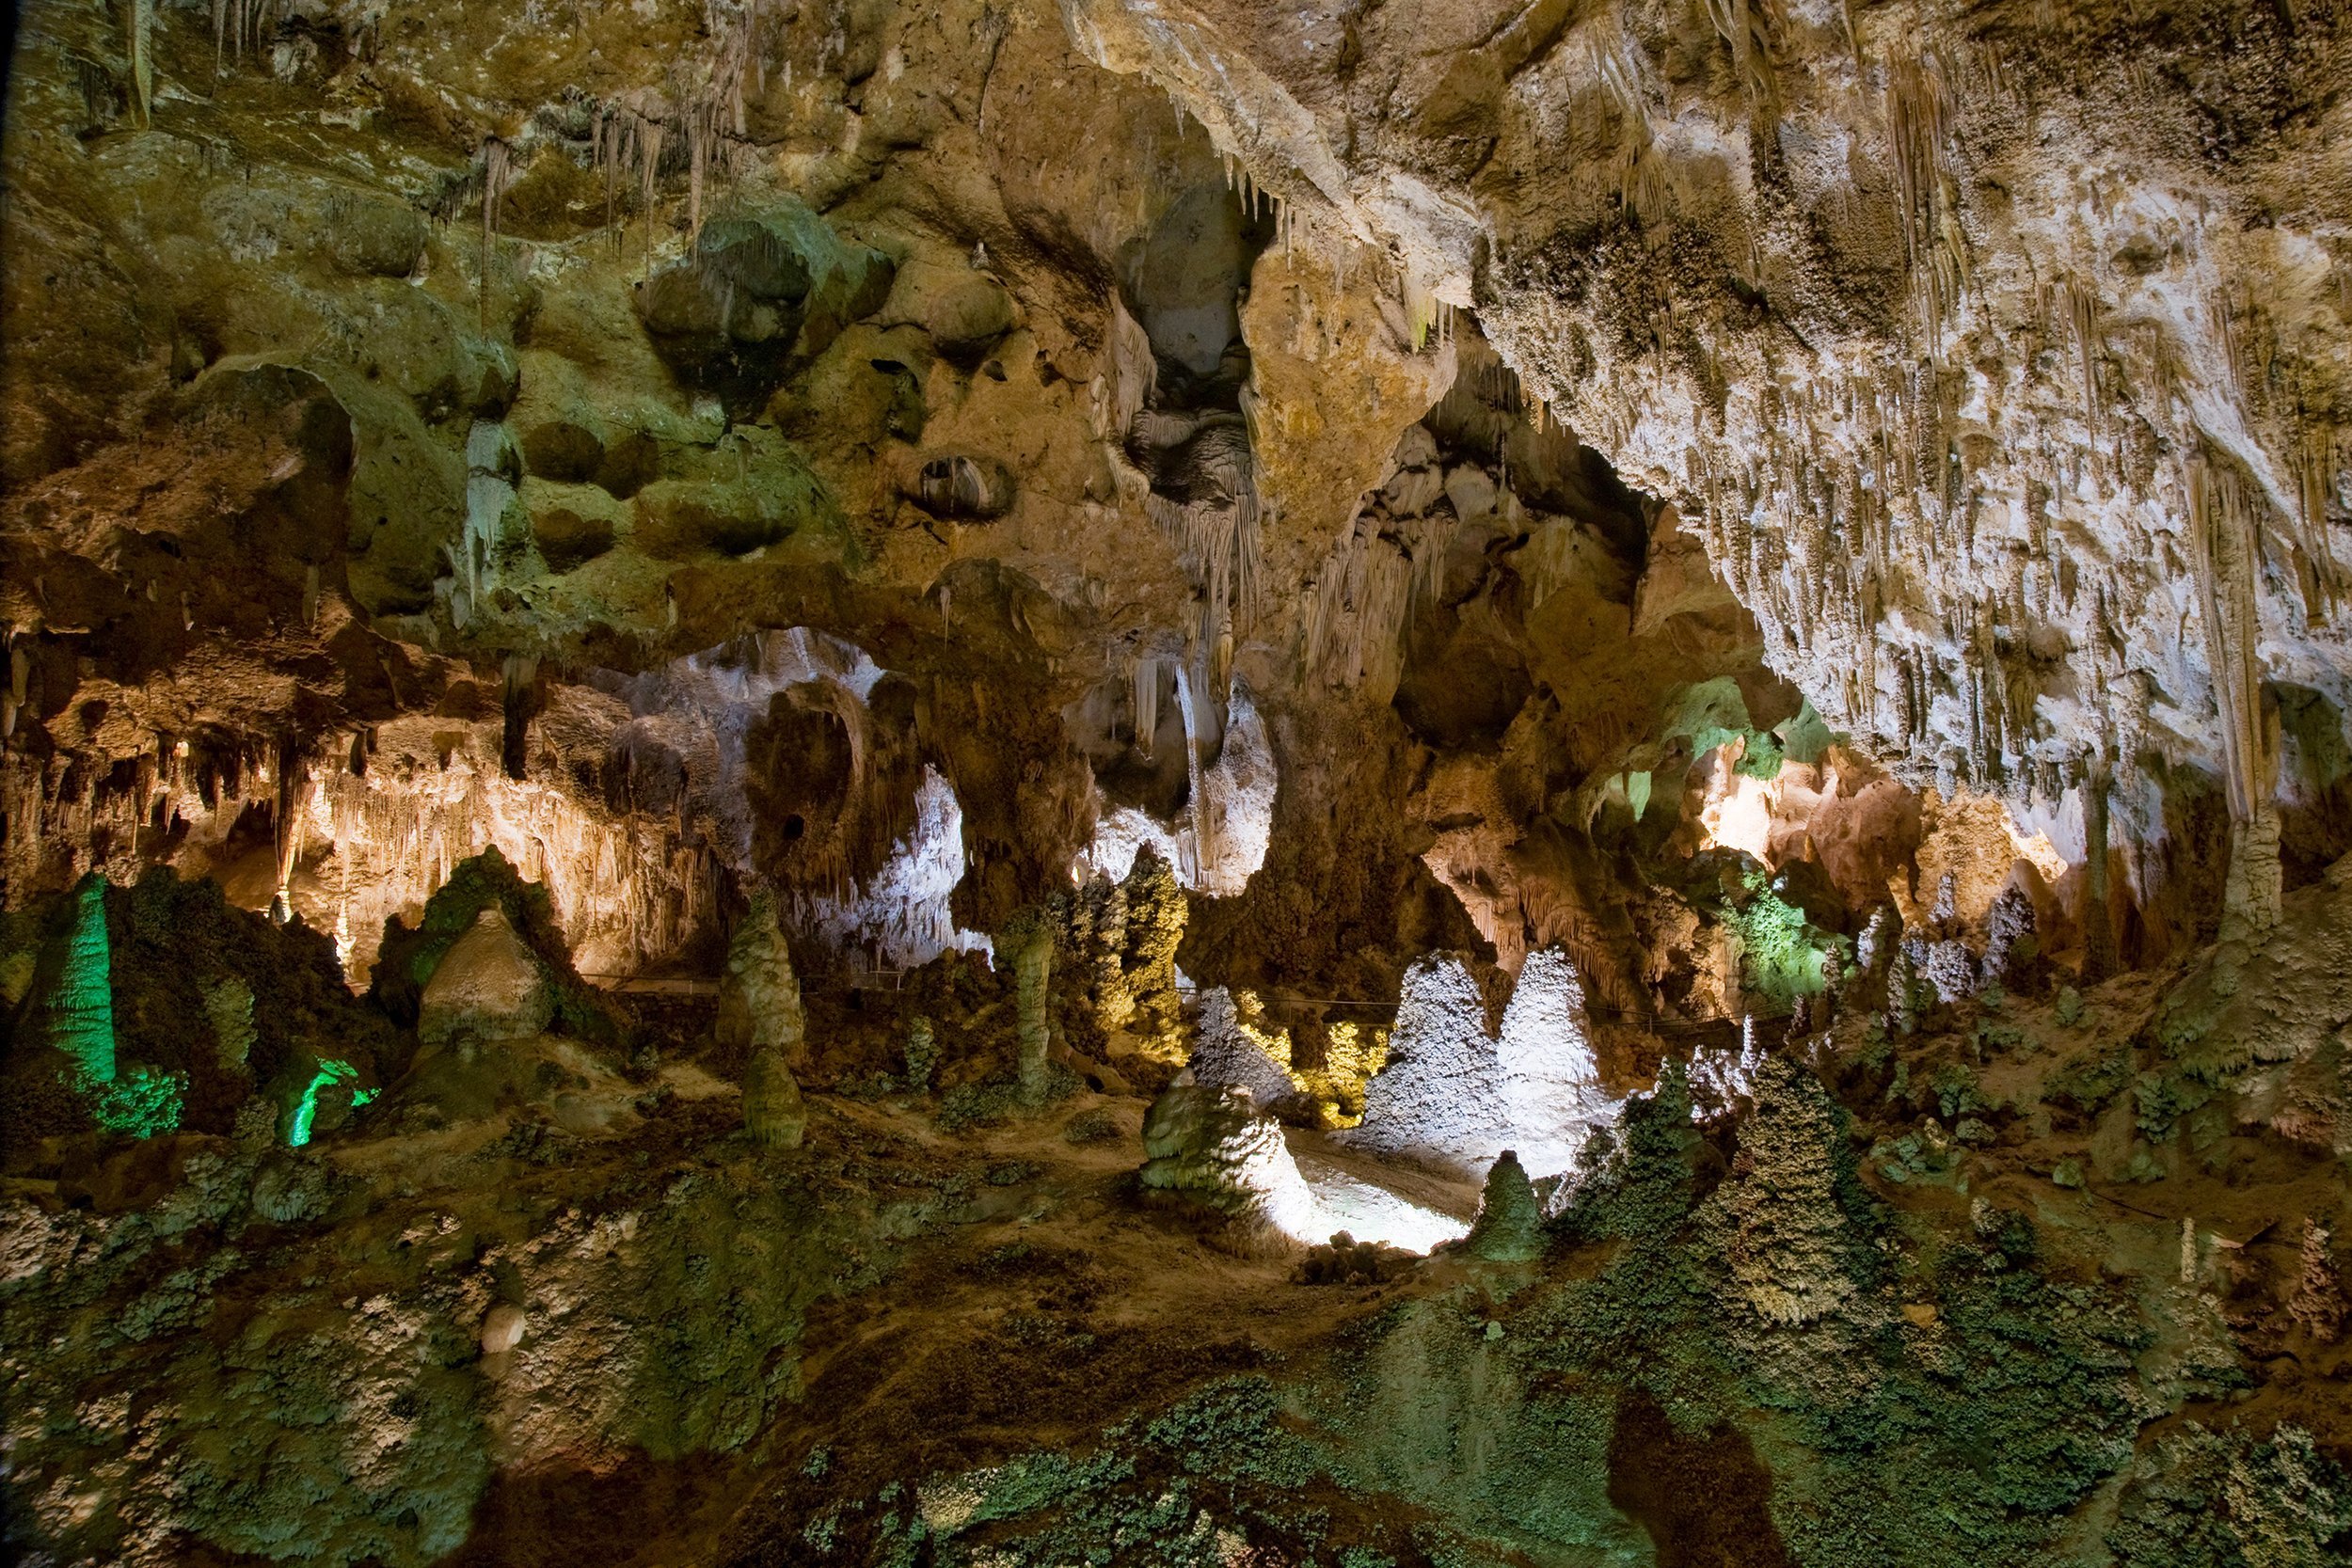 <p>Renowned for their beauty and number, the caves at <a href="https://www.nps.gov/cave/index.htm">Carlsbad Caverns</a> offer insight into the lives of bats. Admission is $15 for adults and free for kids 15 and under, free). From April to mid-October, visitors can watch thousands of bats leave the cave at dusk to find food. August and September are often the best time to visit, as newborn bats and migrating bats join the crowd. </p><p><b>Related:</b> <a href="https://blog.cheapism.com/road-trip-attractions/">77 Attractions to See While Driving Across the Country</a></p>